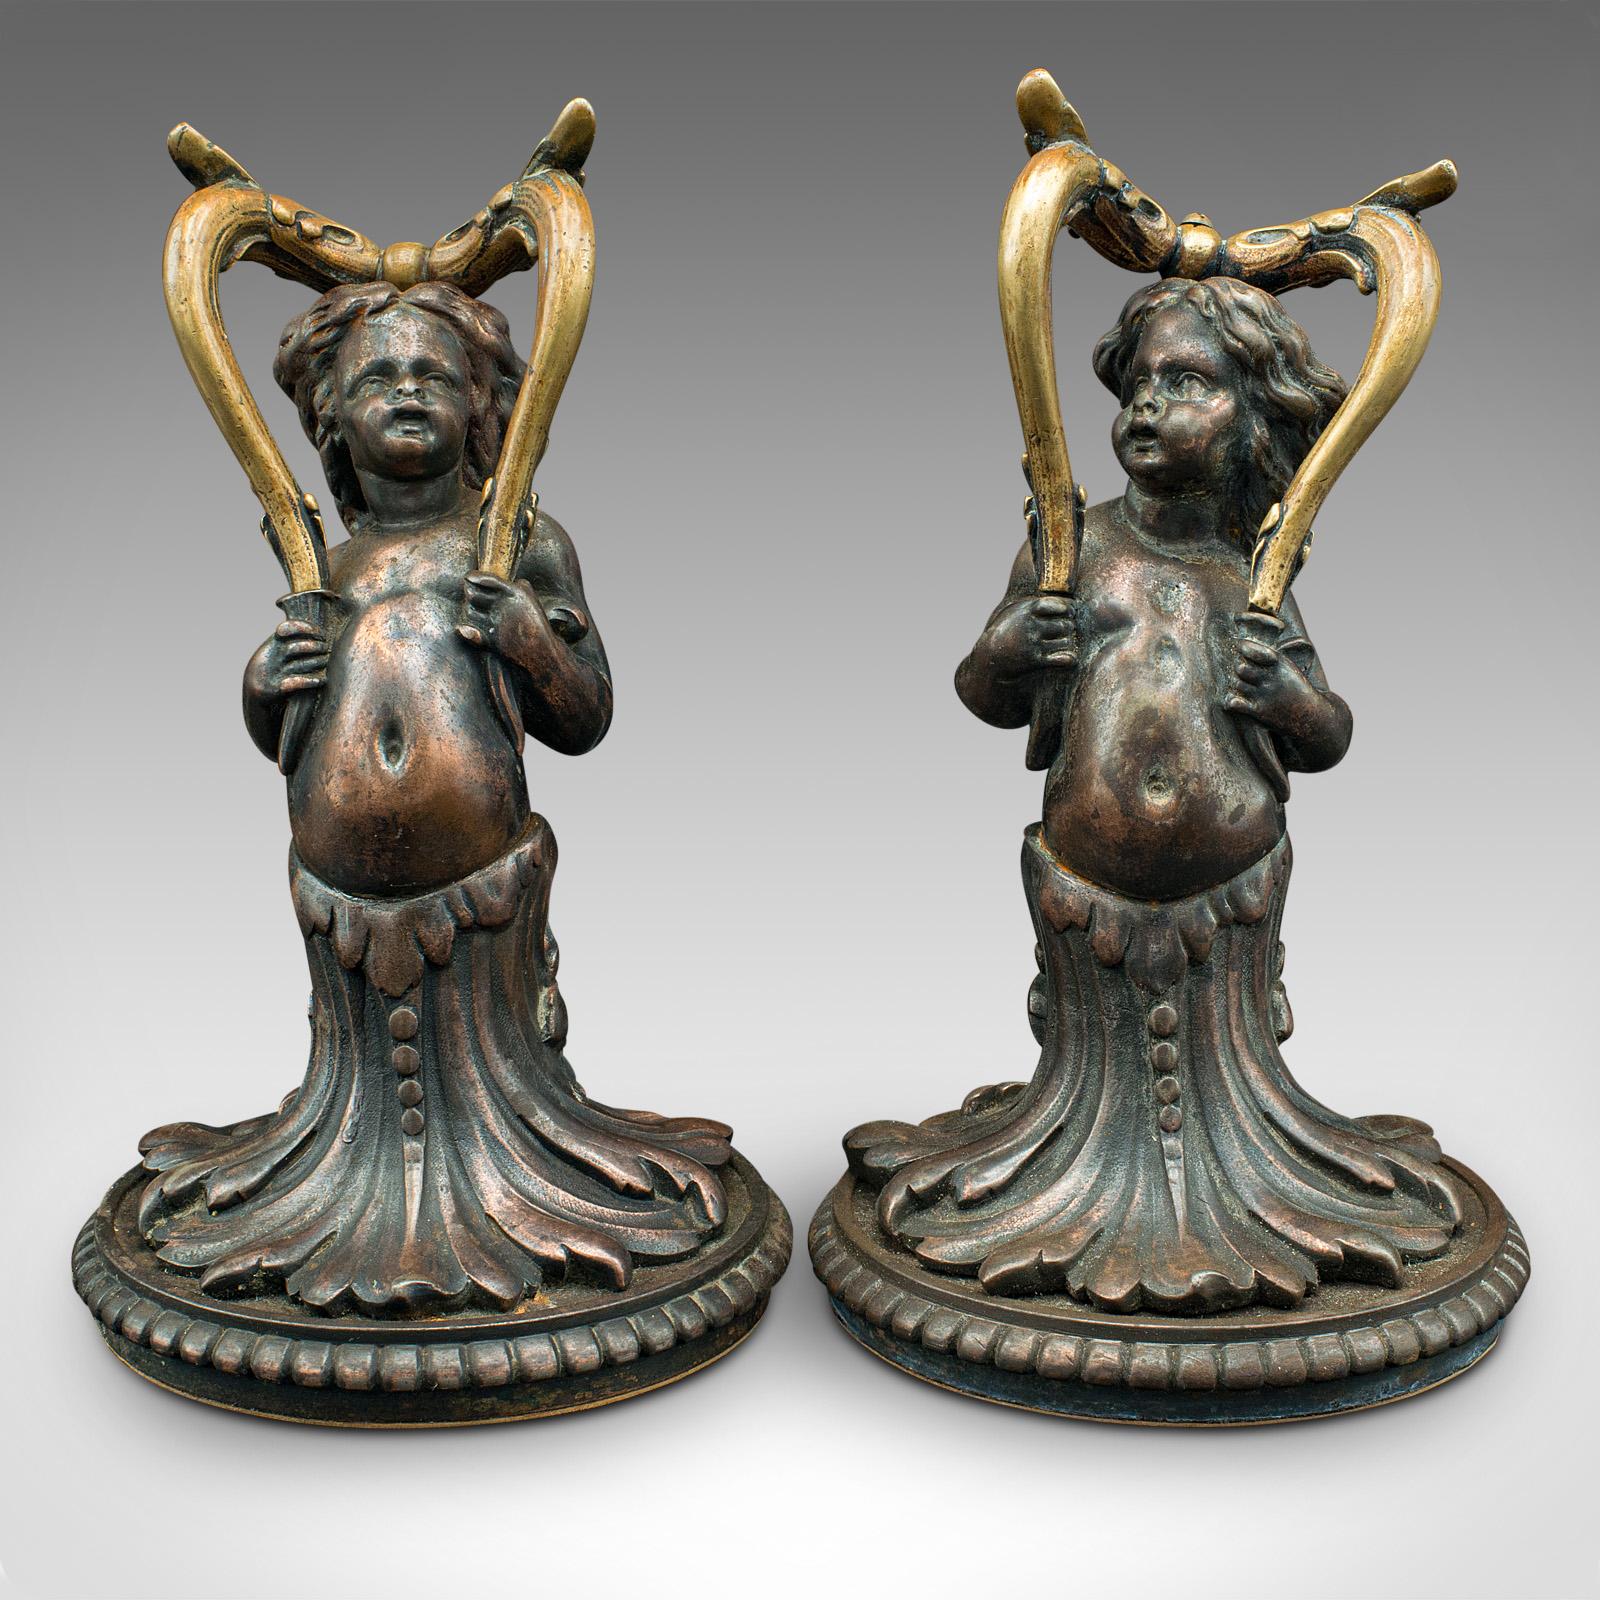 This is a pair of antique decorative cherubs. An English, bronze doorstop or fireside figure, dating to the late Victorian period, circa 1900.

Highly distinctive decorative cherub figures
Displaying a desirable aged patina and in good order
Quality